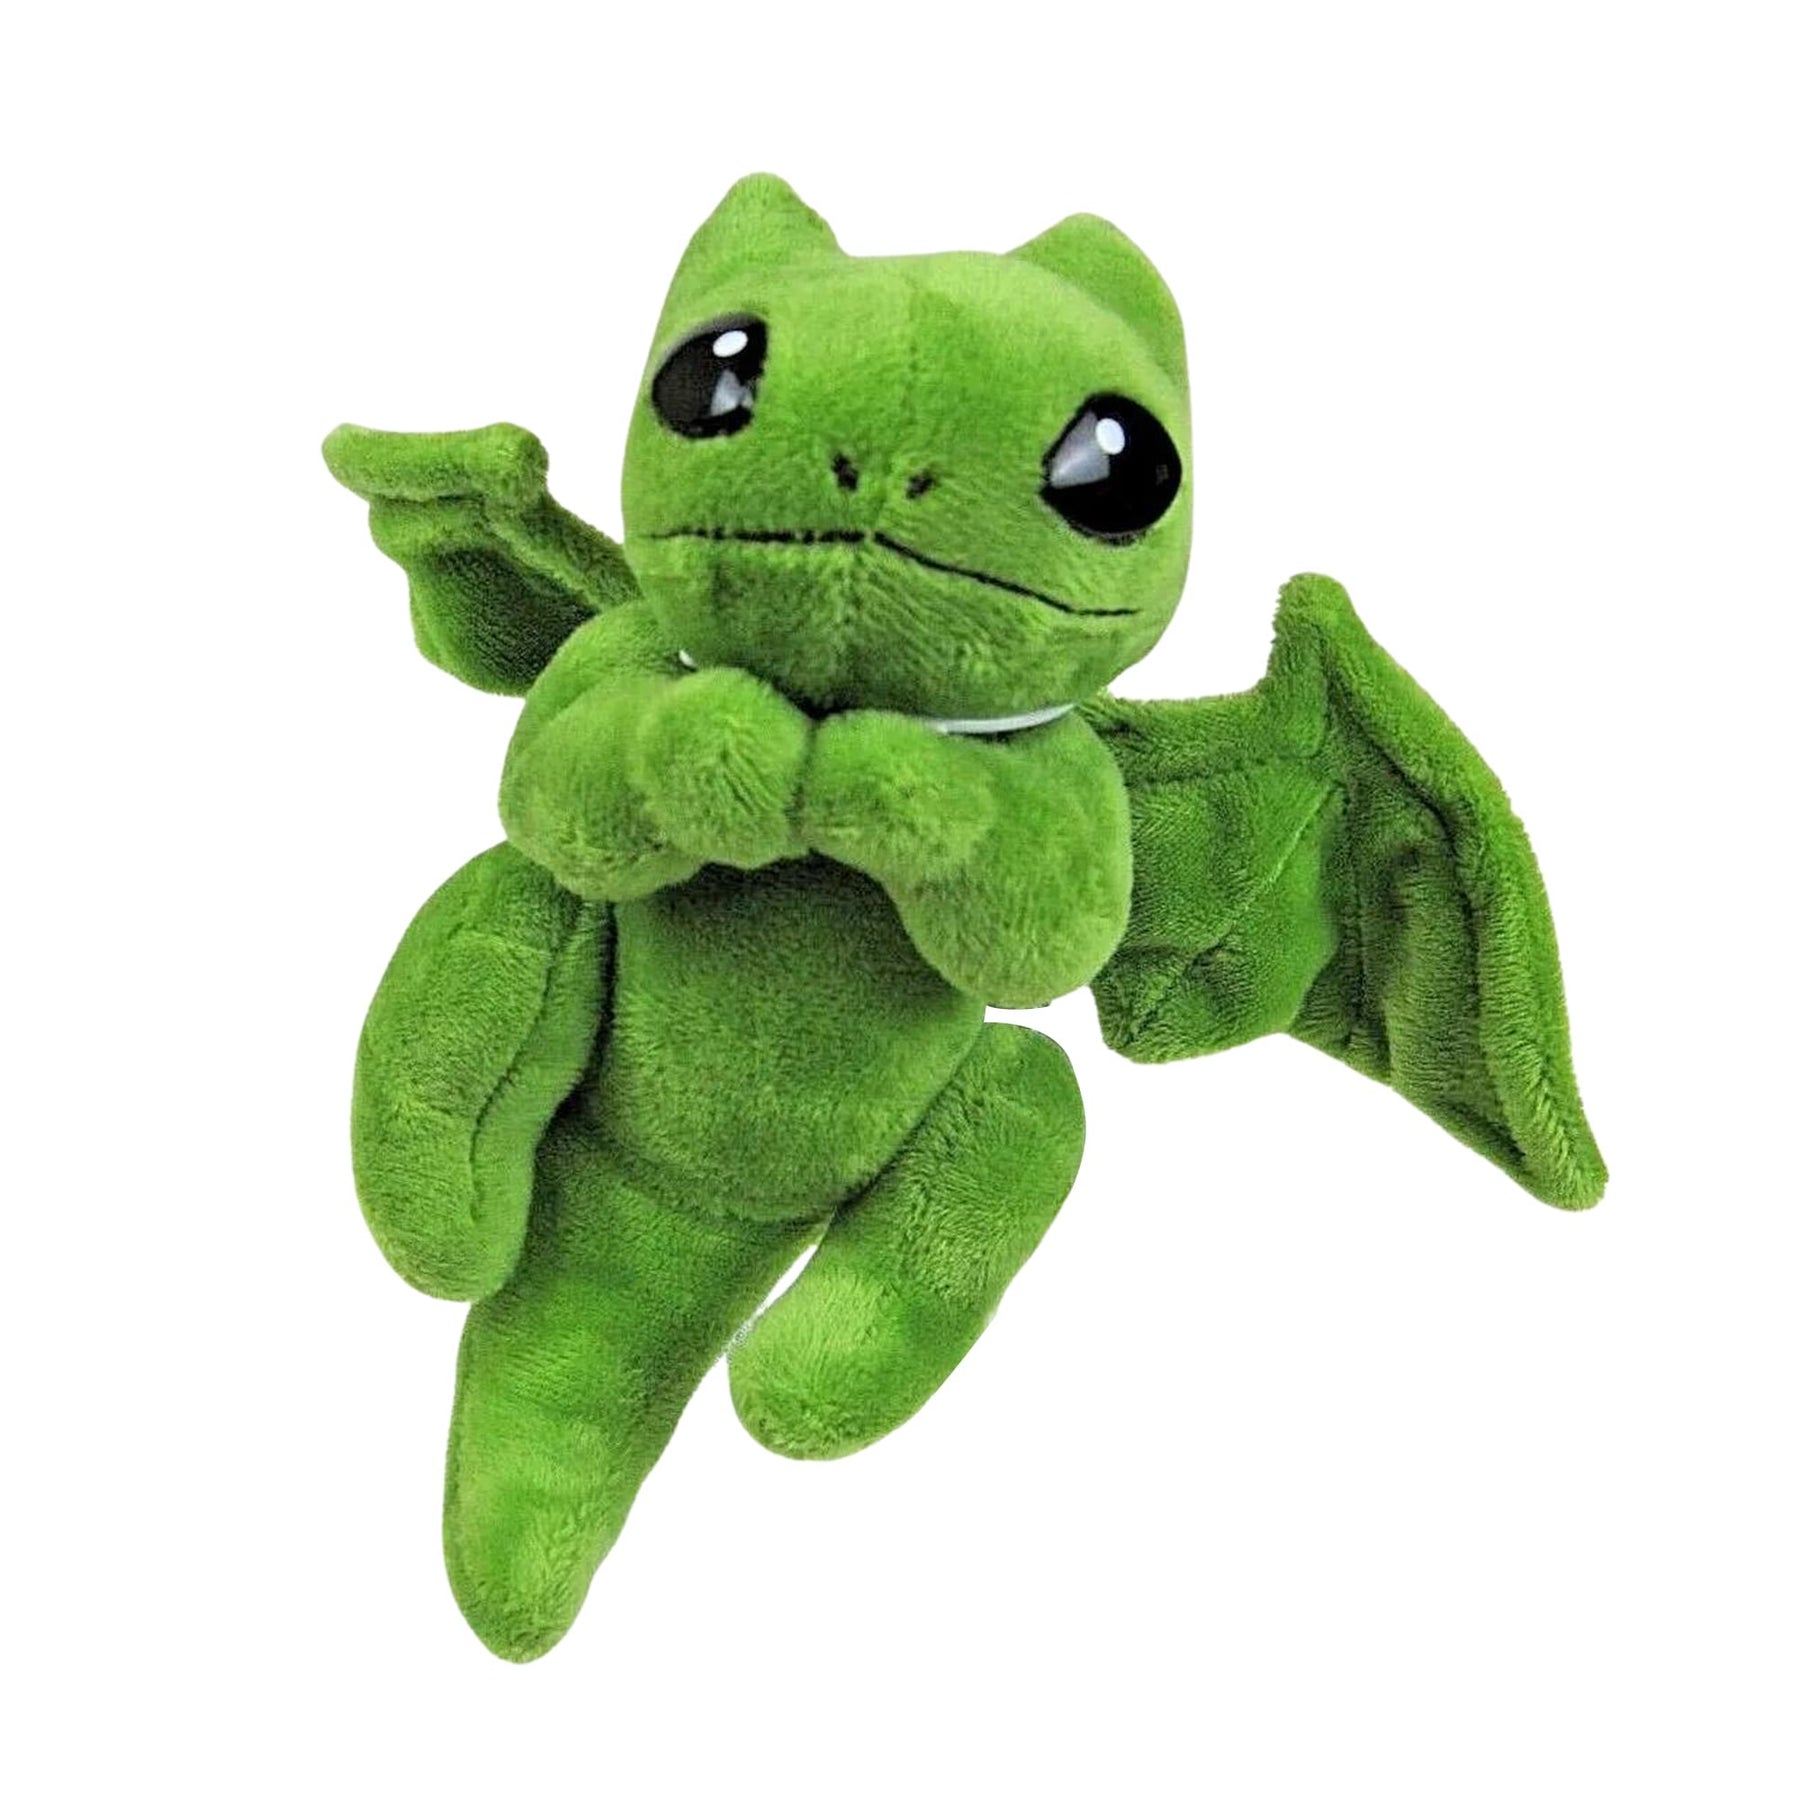 Little Embers 7 Inch Plush w/ Moveable Limbs & Magnetic Hands | Soot (Green)